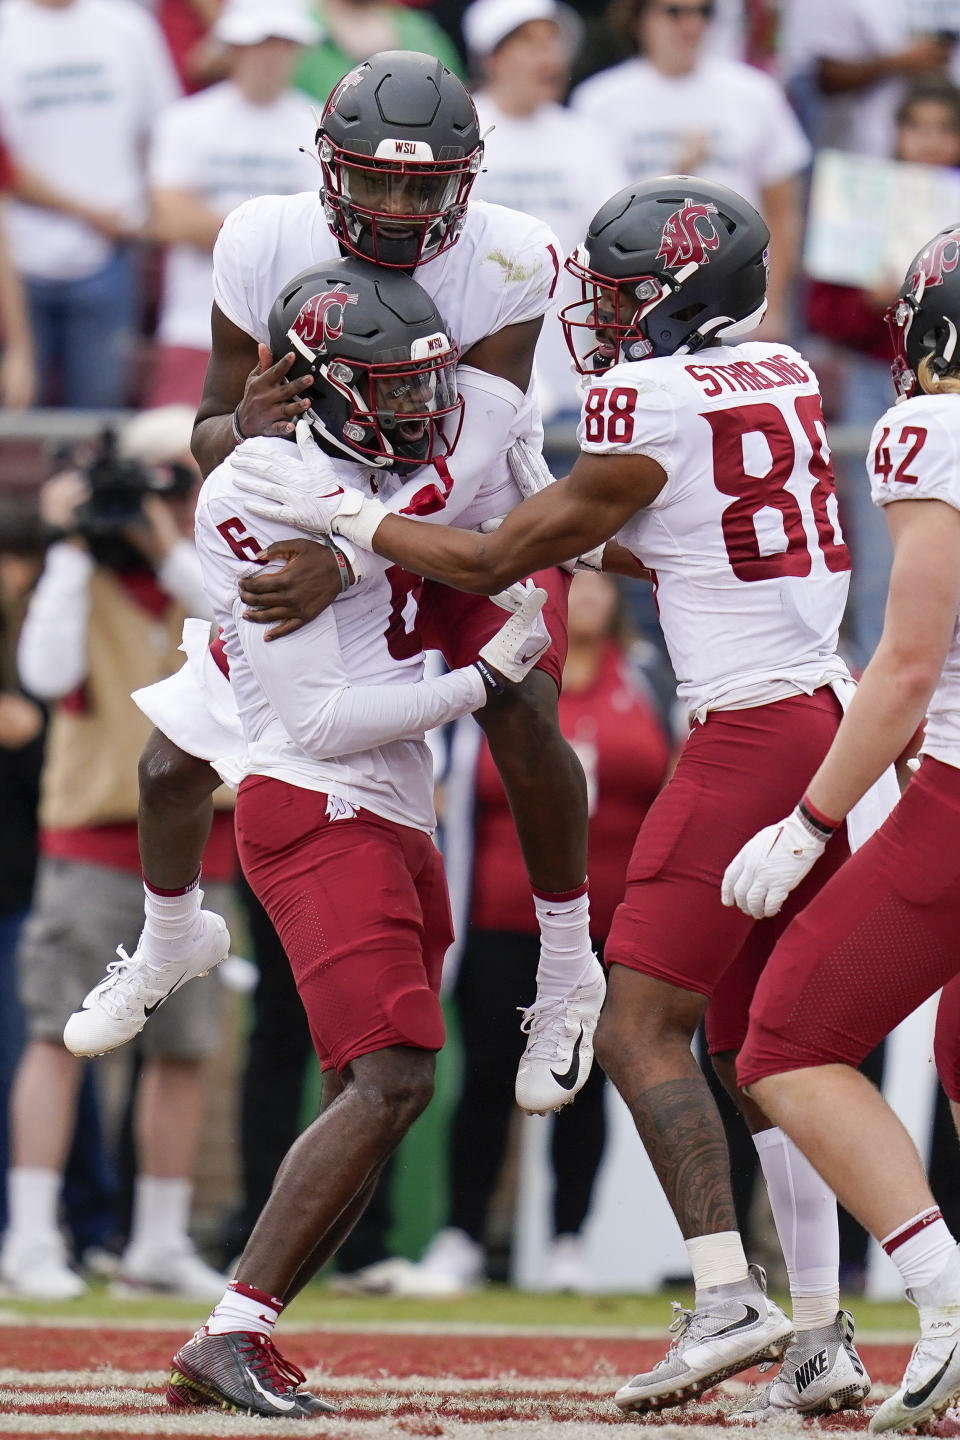 Washington State quarterback Cameron Ward (1) celebrates his passing touchdown to wide receiver Donovan Ollie (6) during the first half of an NCAA college football game against Stanford in Stanford, Calif., Saturday, Nov. 5, 2022. (AP Photo/Godofredo A. Vásquez)